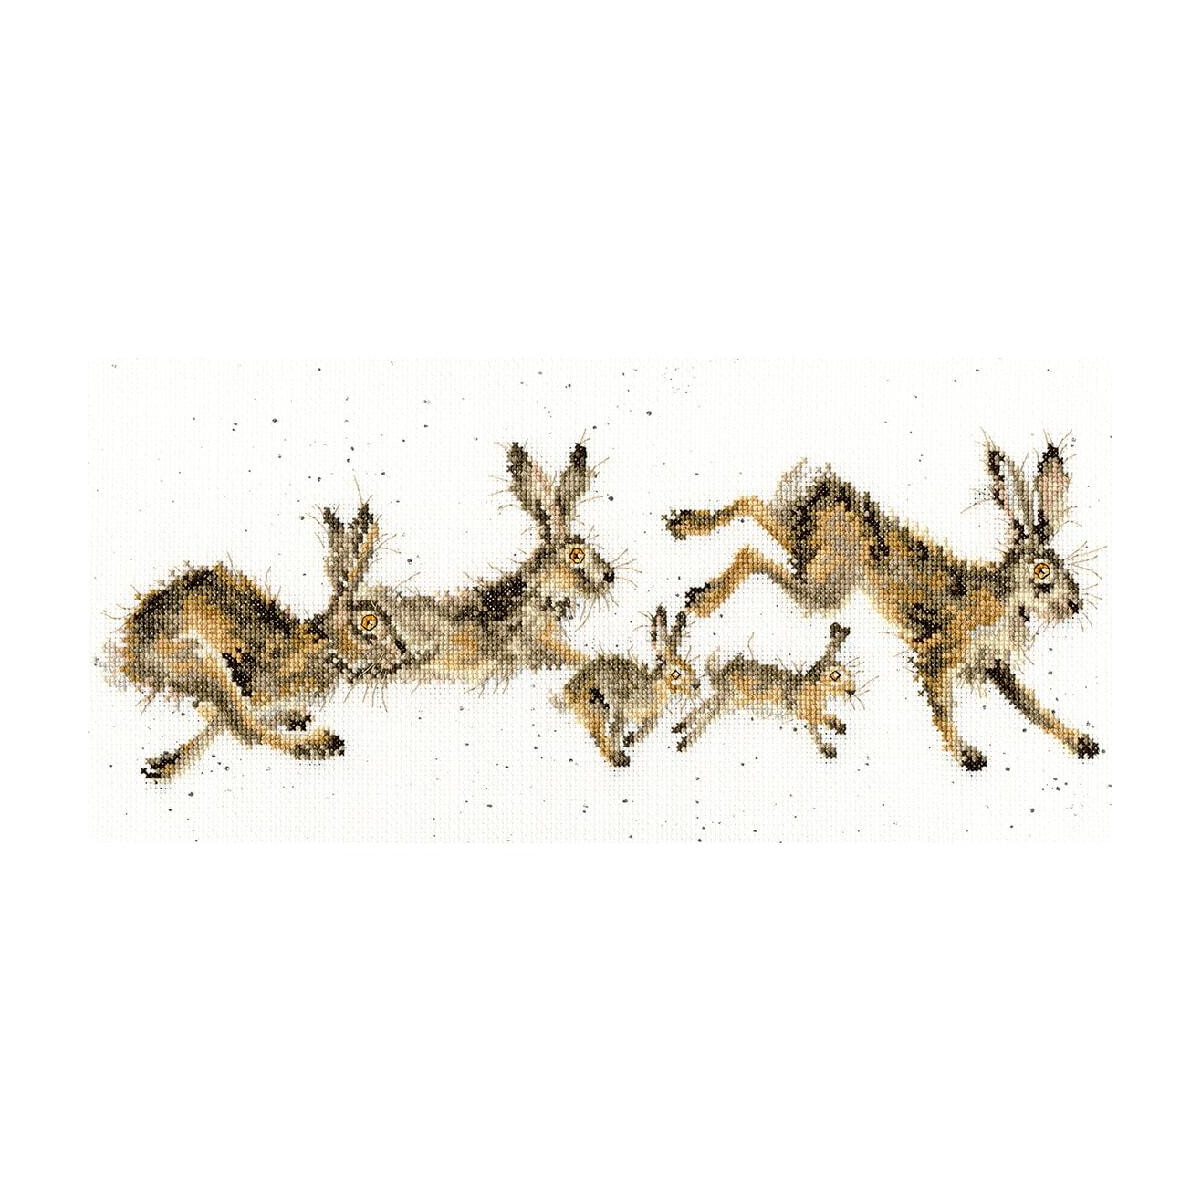 A hand-drawn image shows five rabbits in various dynamic...